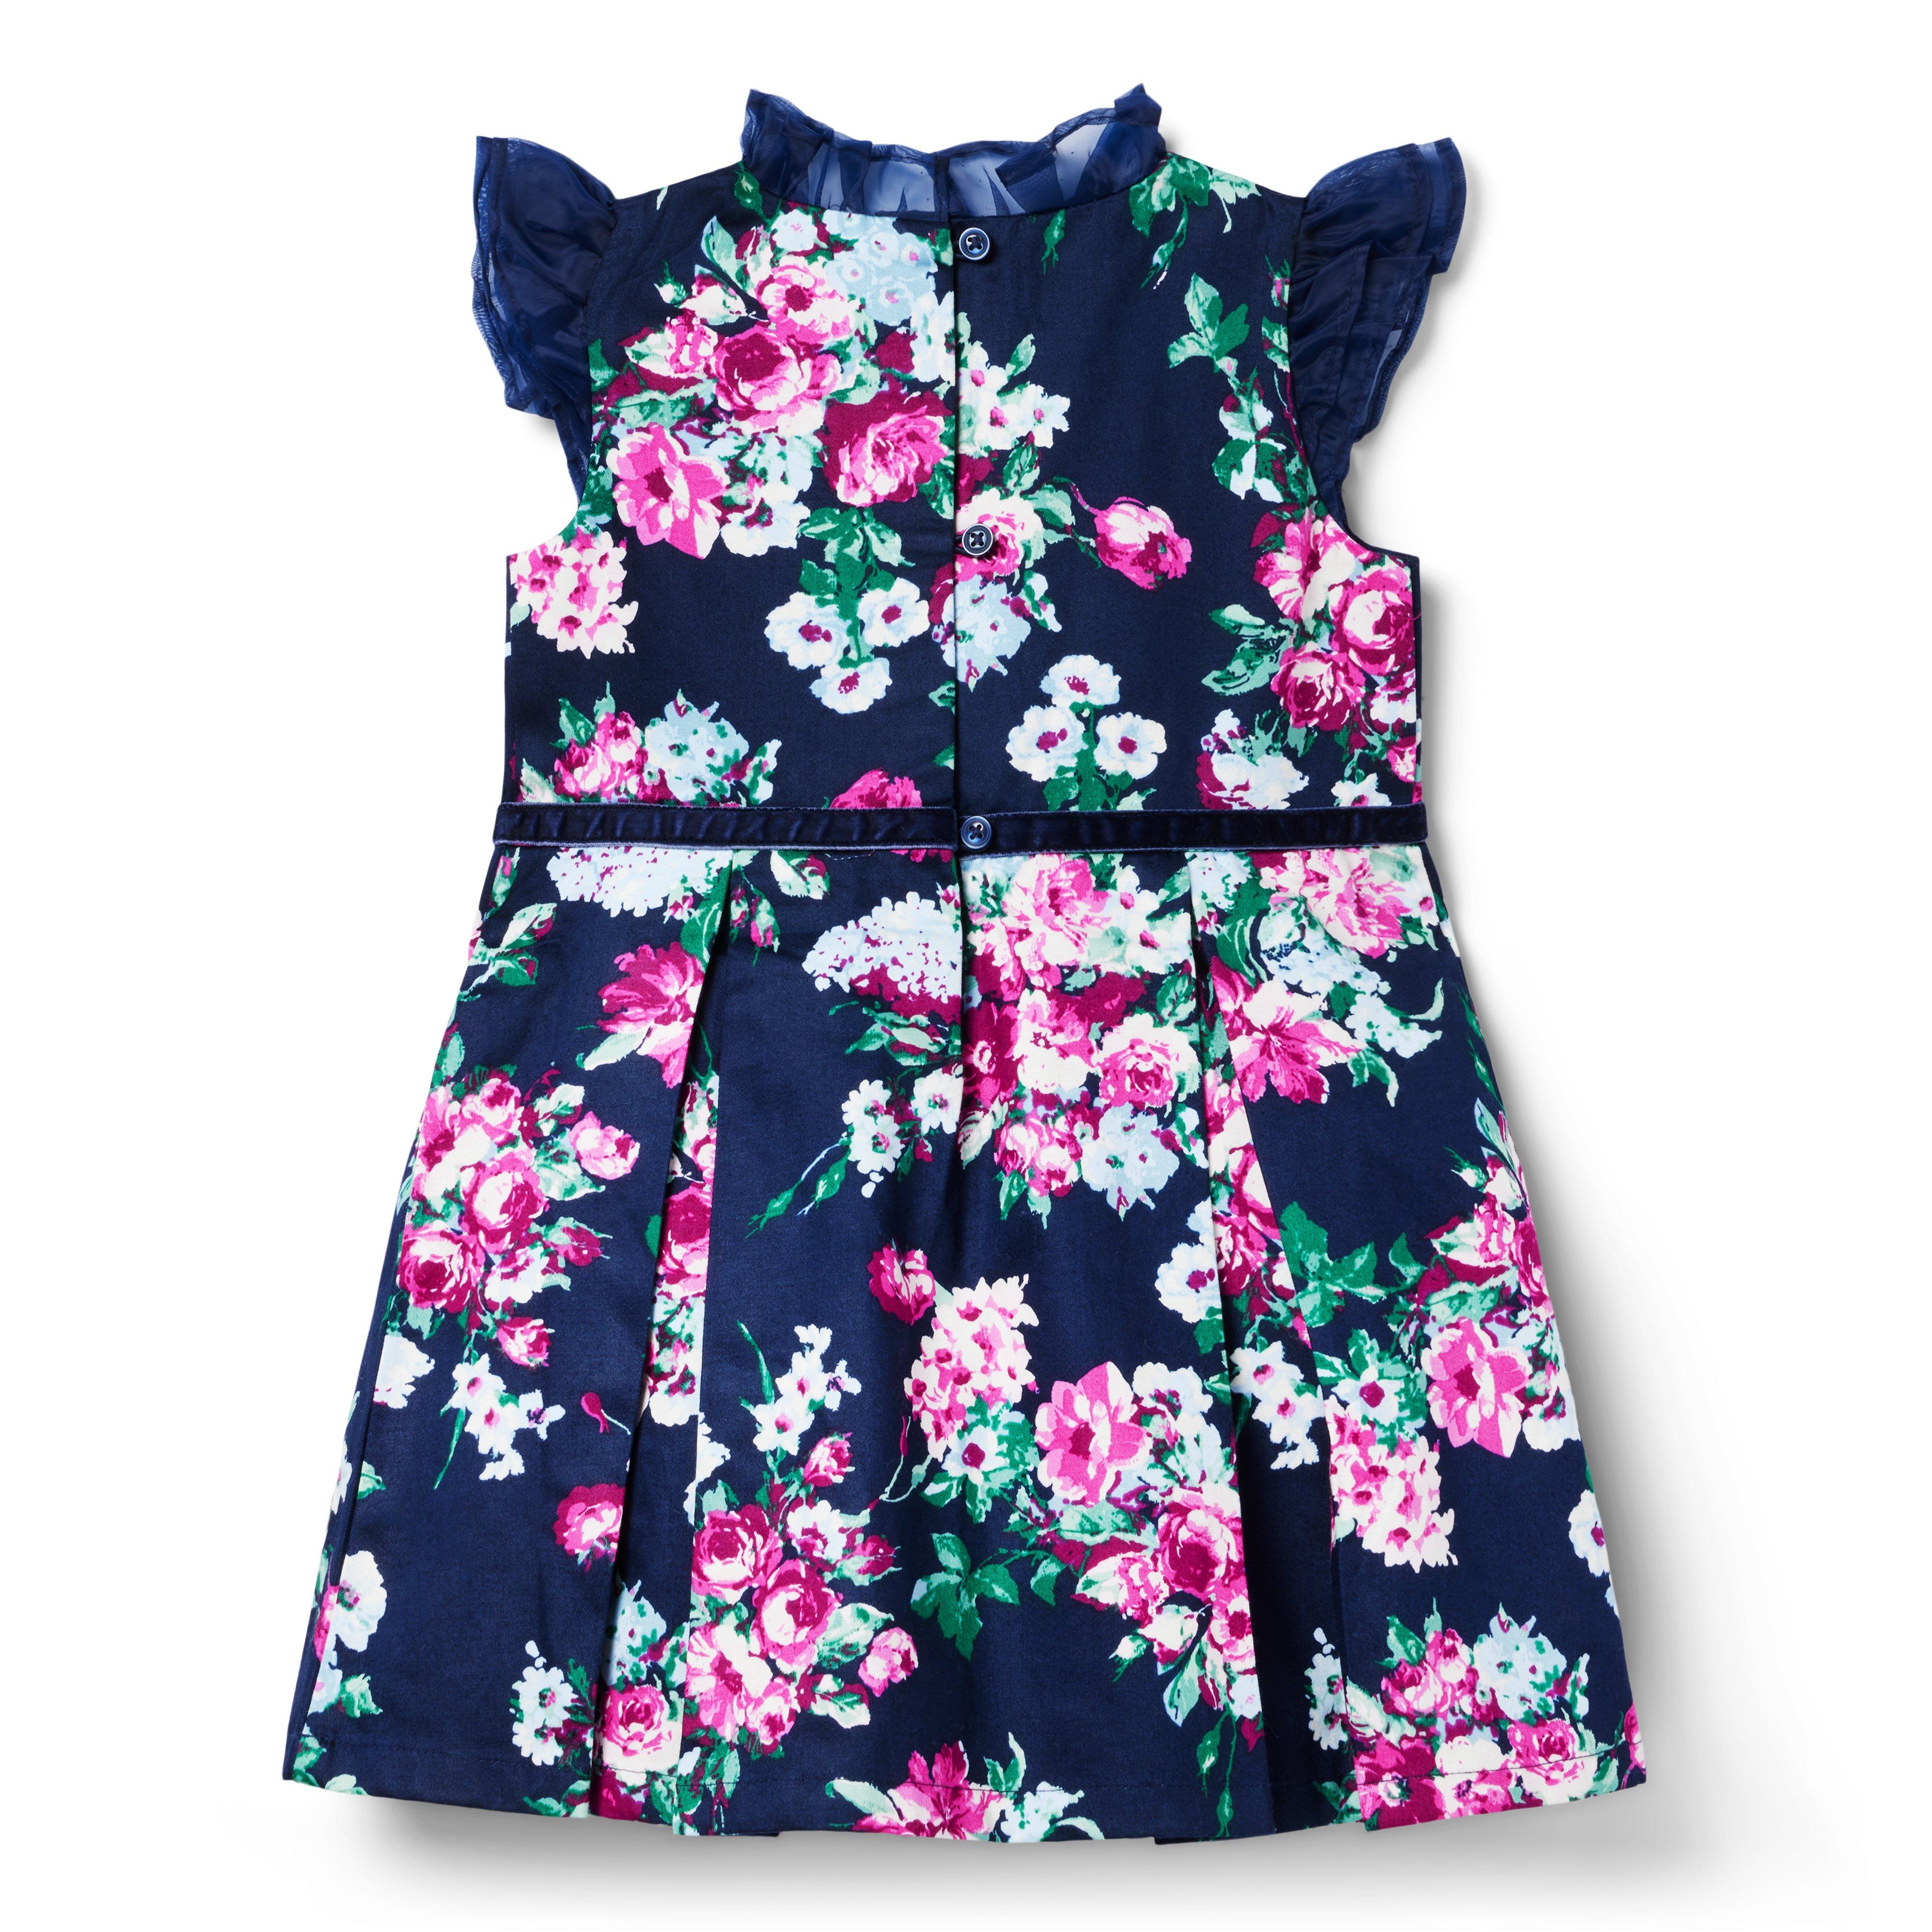 Girl Merchant Marine Floral Floral Satin Ruffle Dress by Janie and Jack